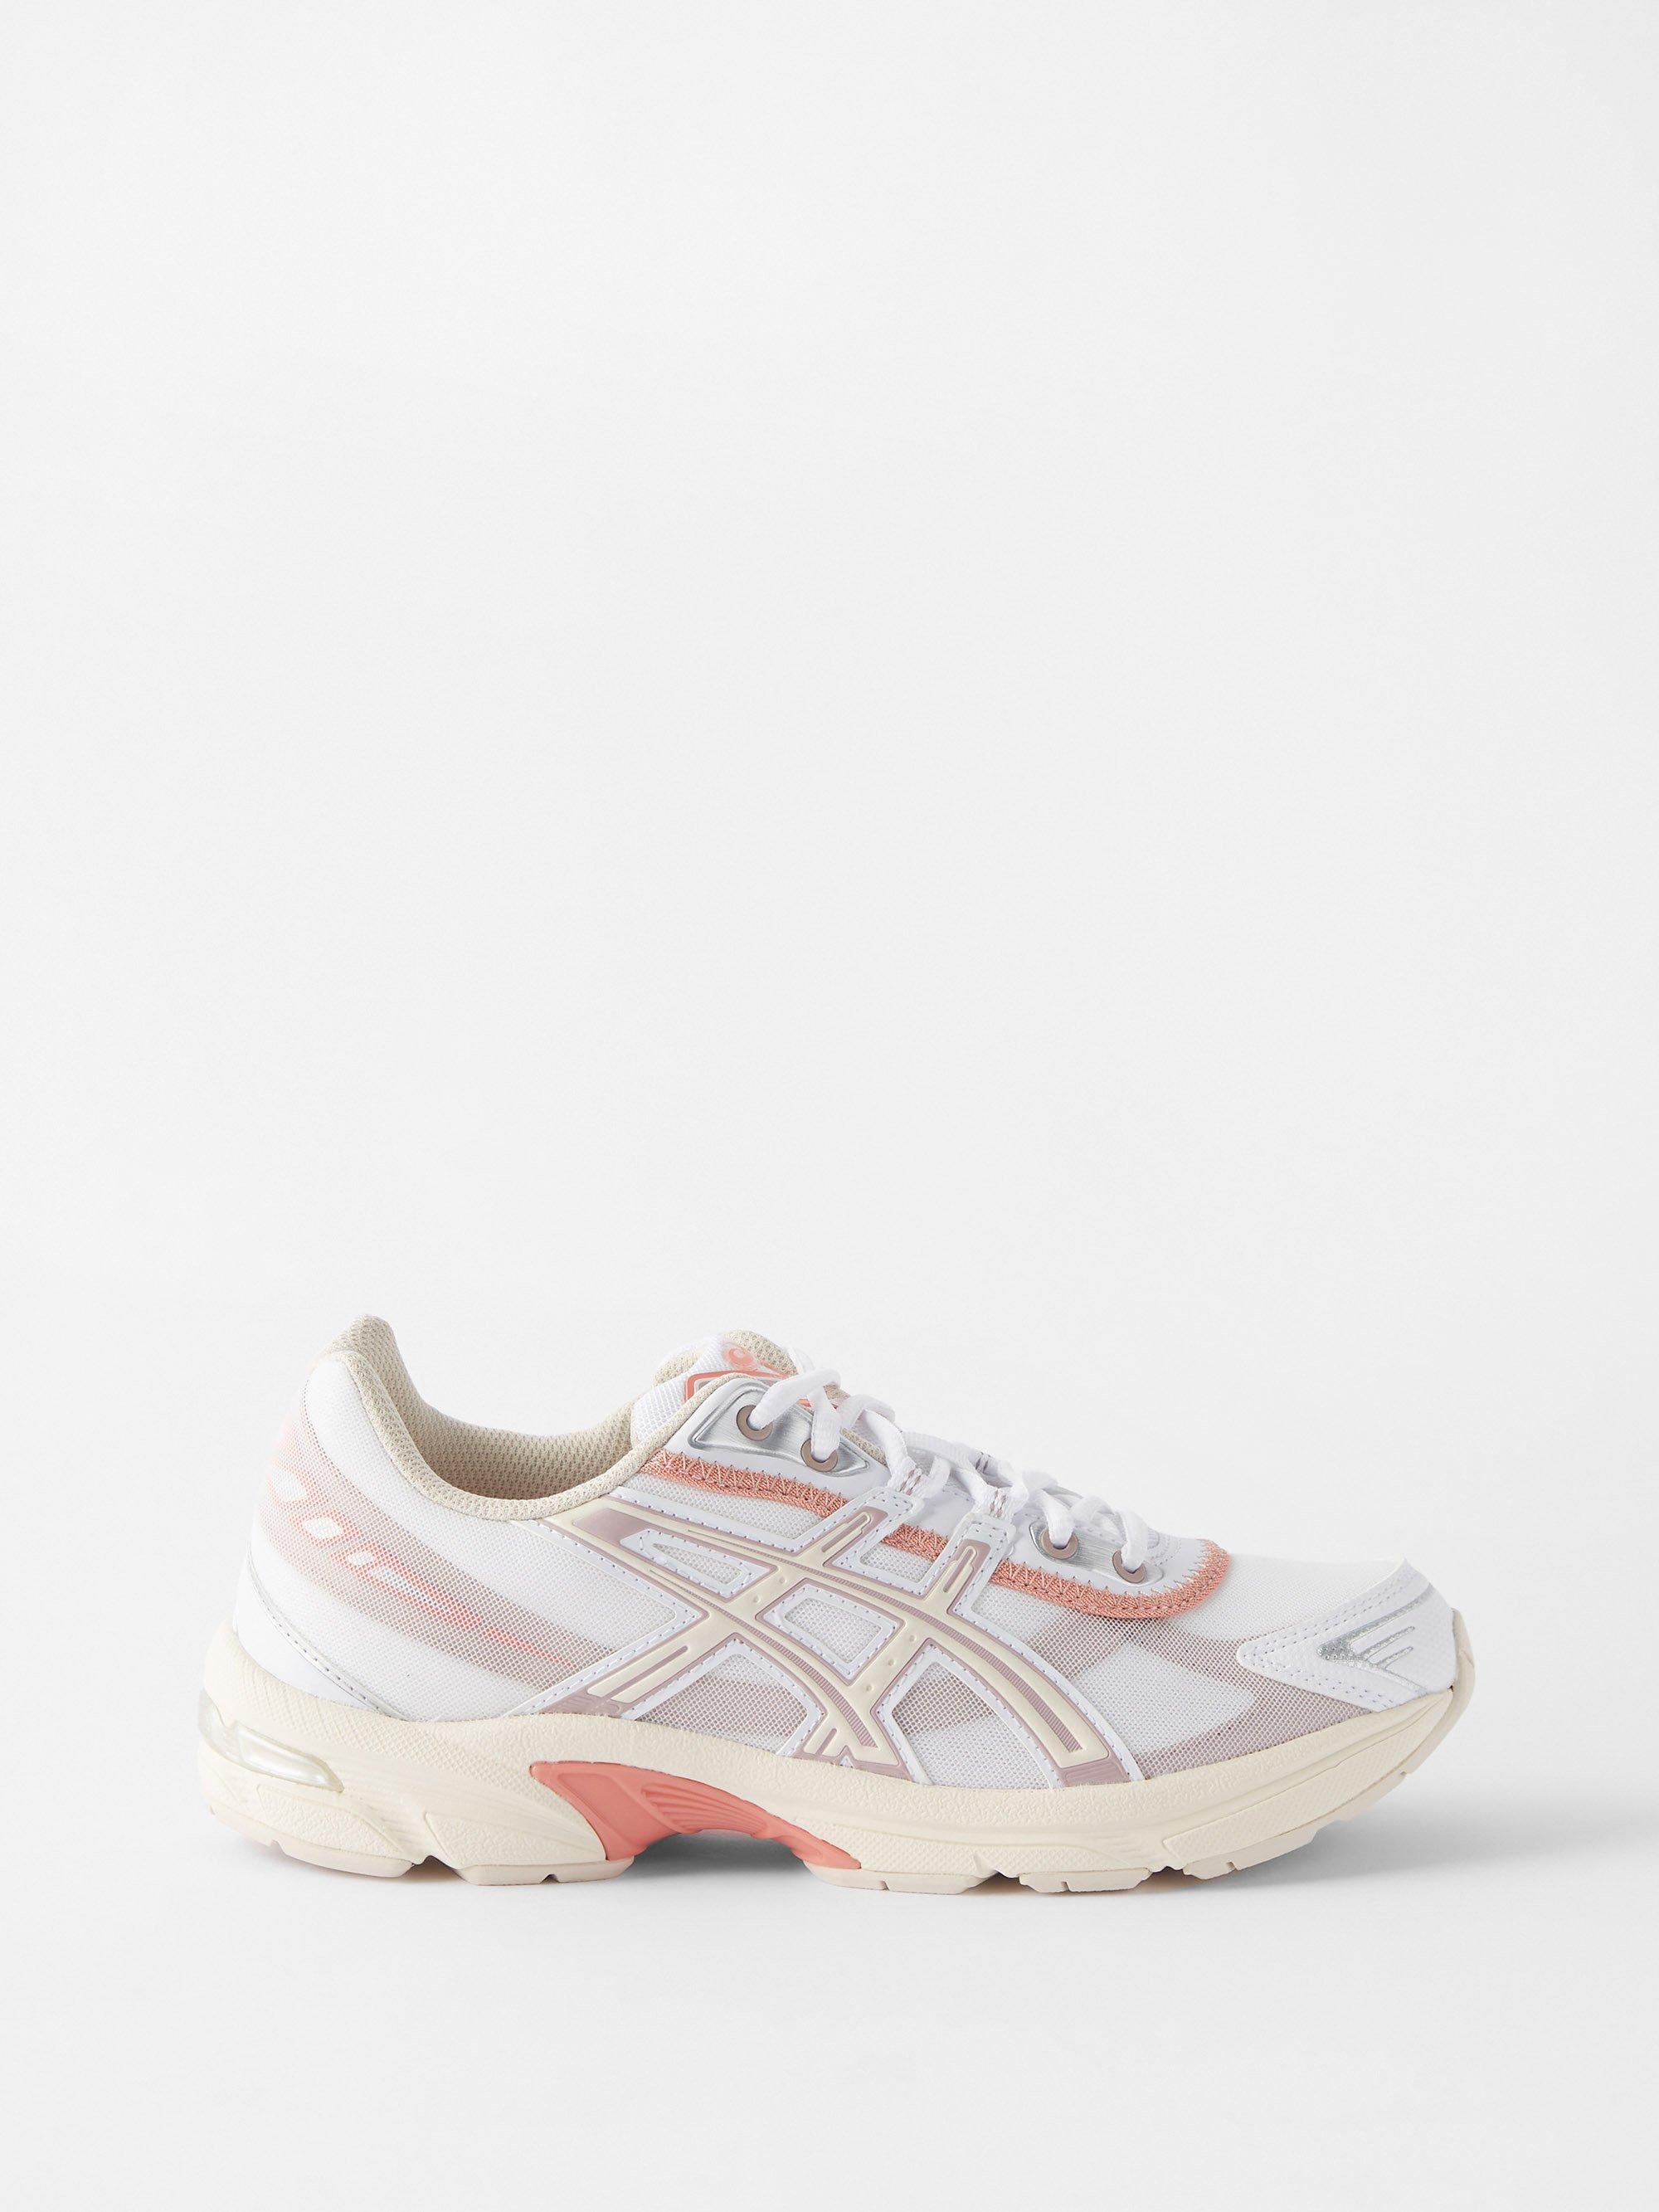 Asics Gel-1130 Leather And Mesh Trainers in White | Lyst